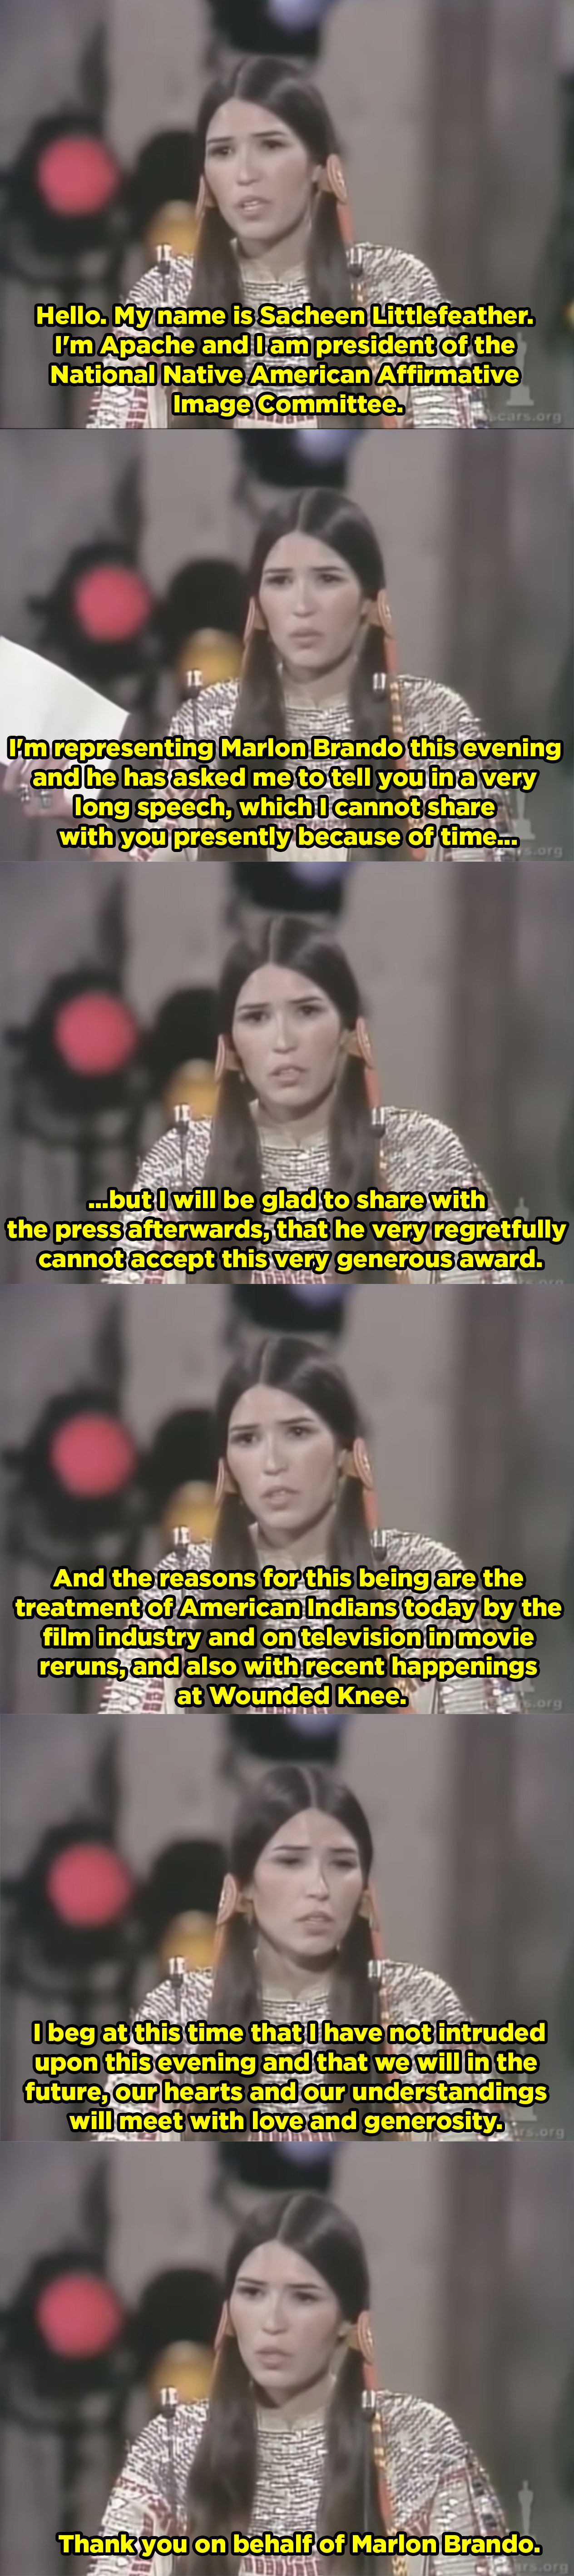 Sacheen Littlefeather refuses the Oscar and says Marlon Brando is protesting the representation of Native Americans in movies and on TV.